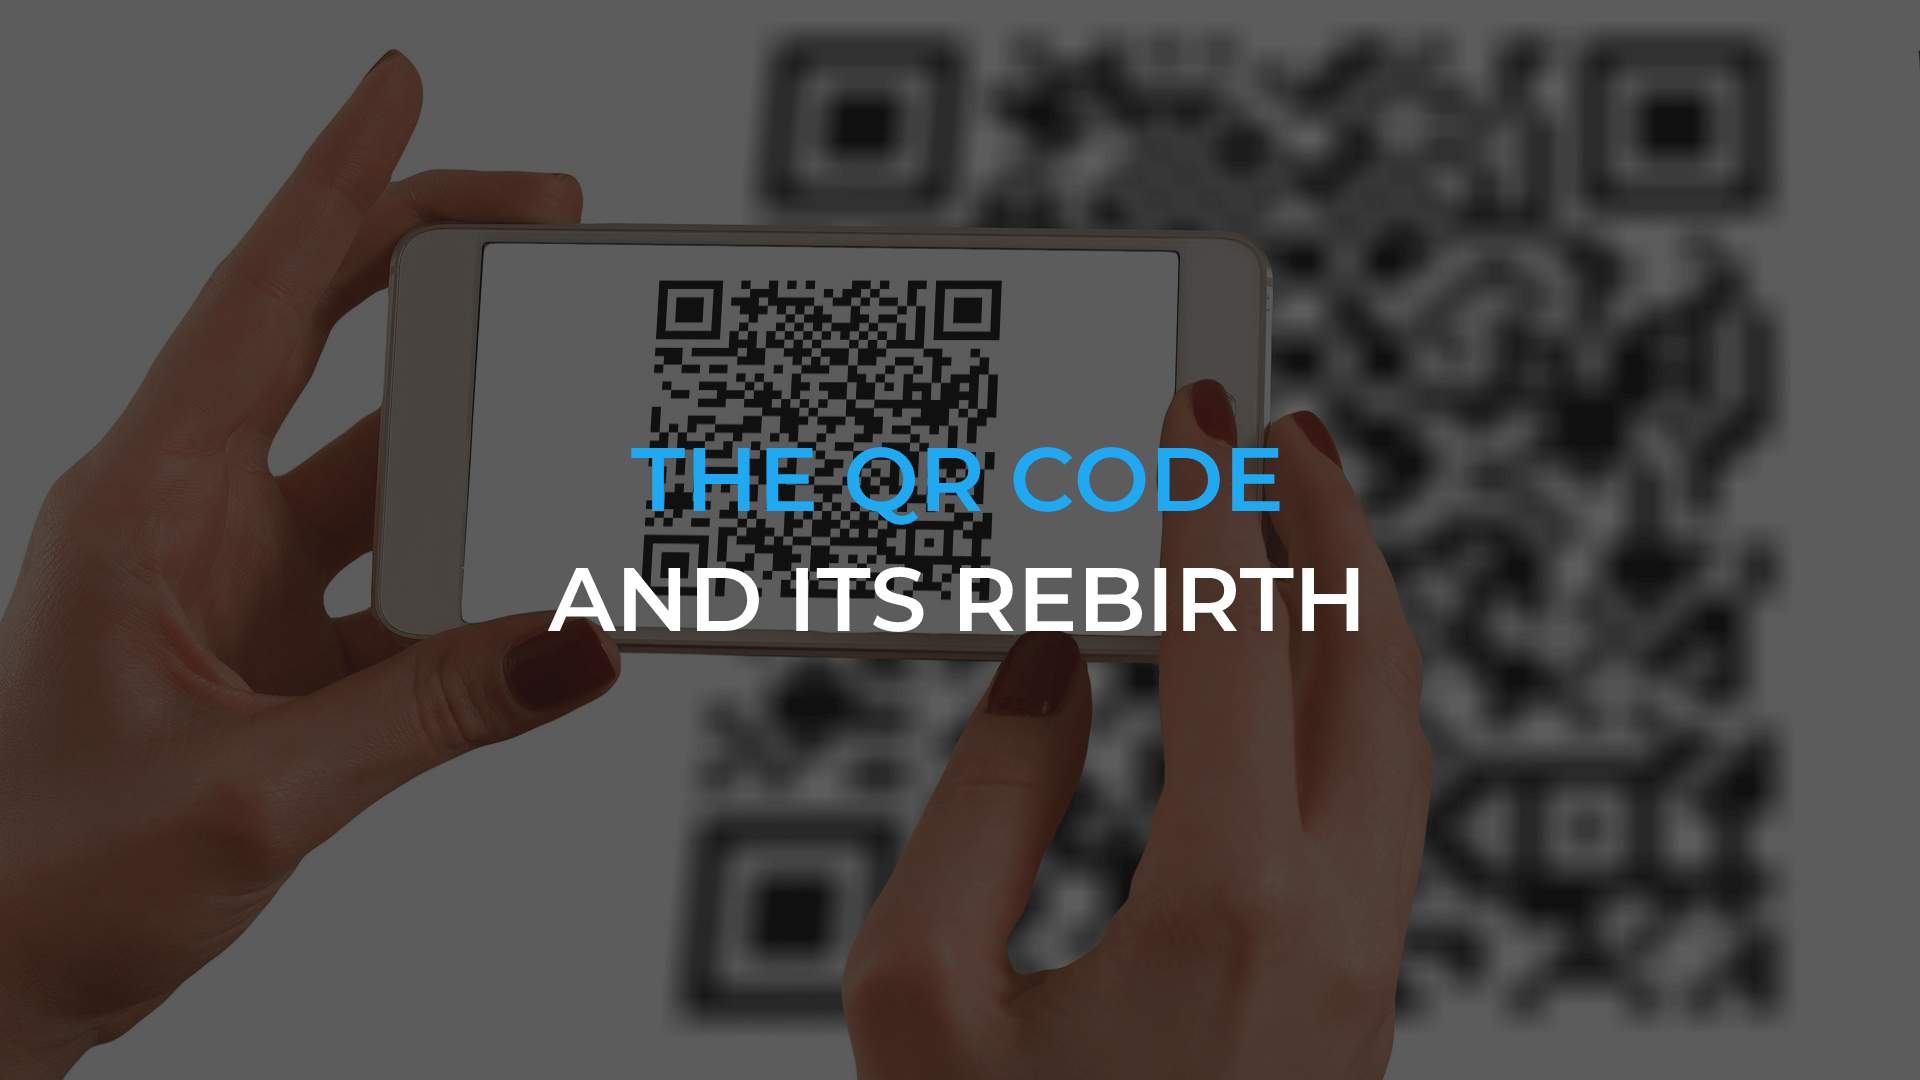 The QR code and its rebirth